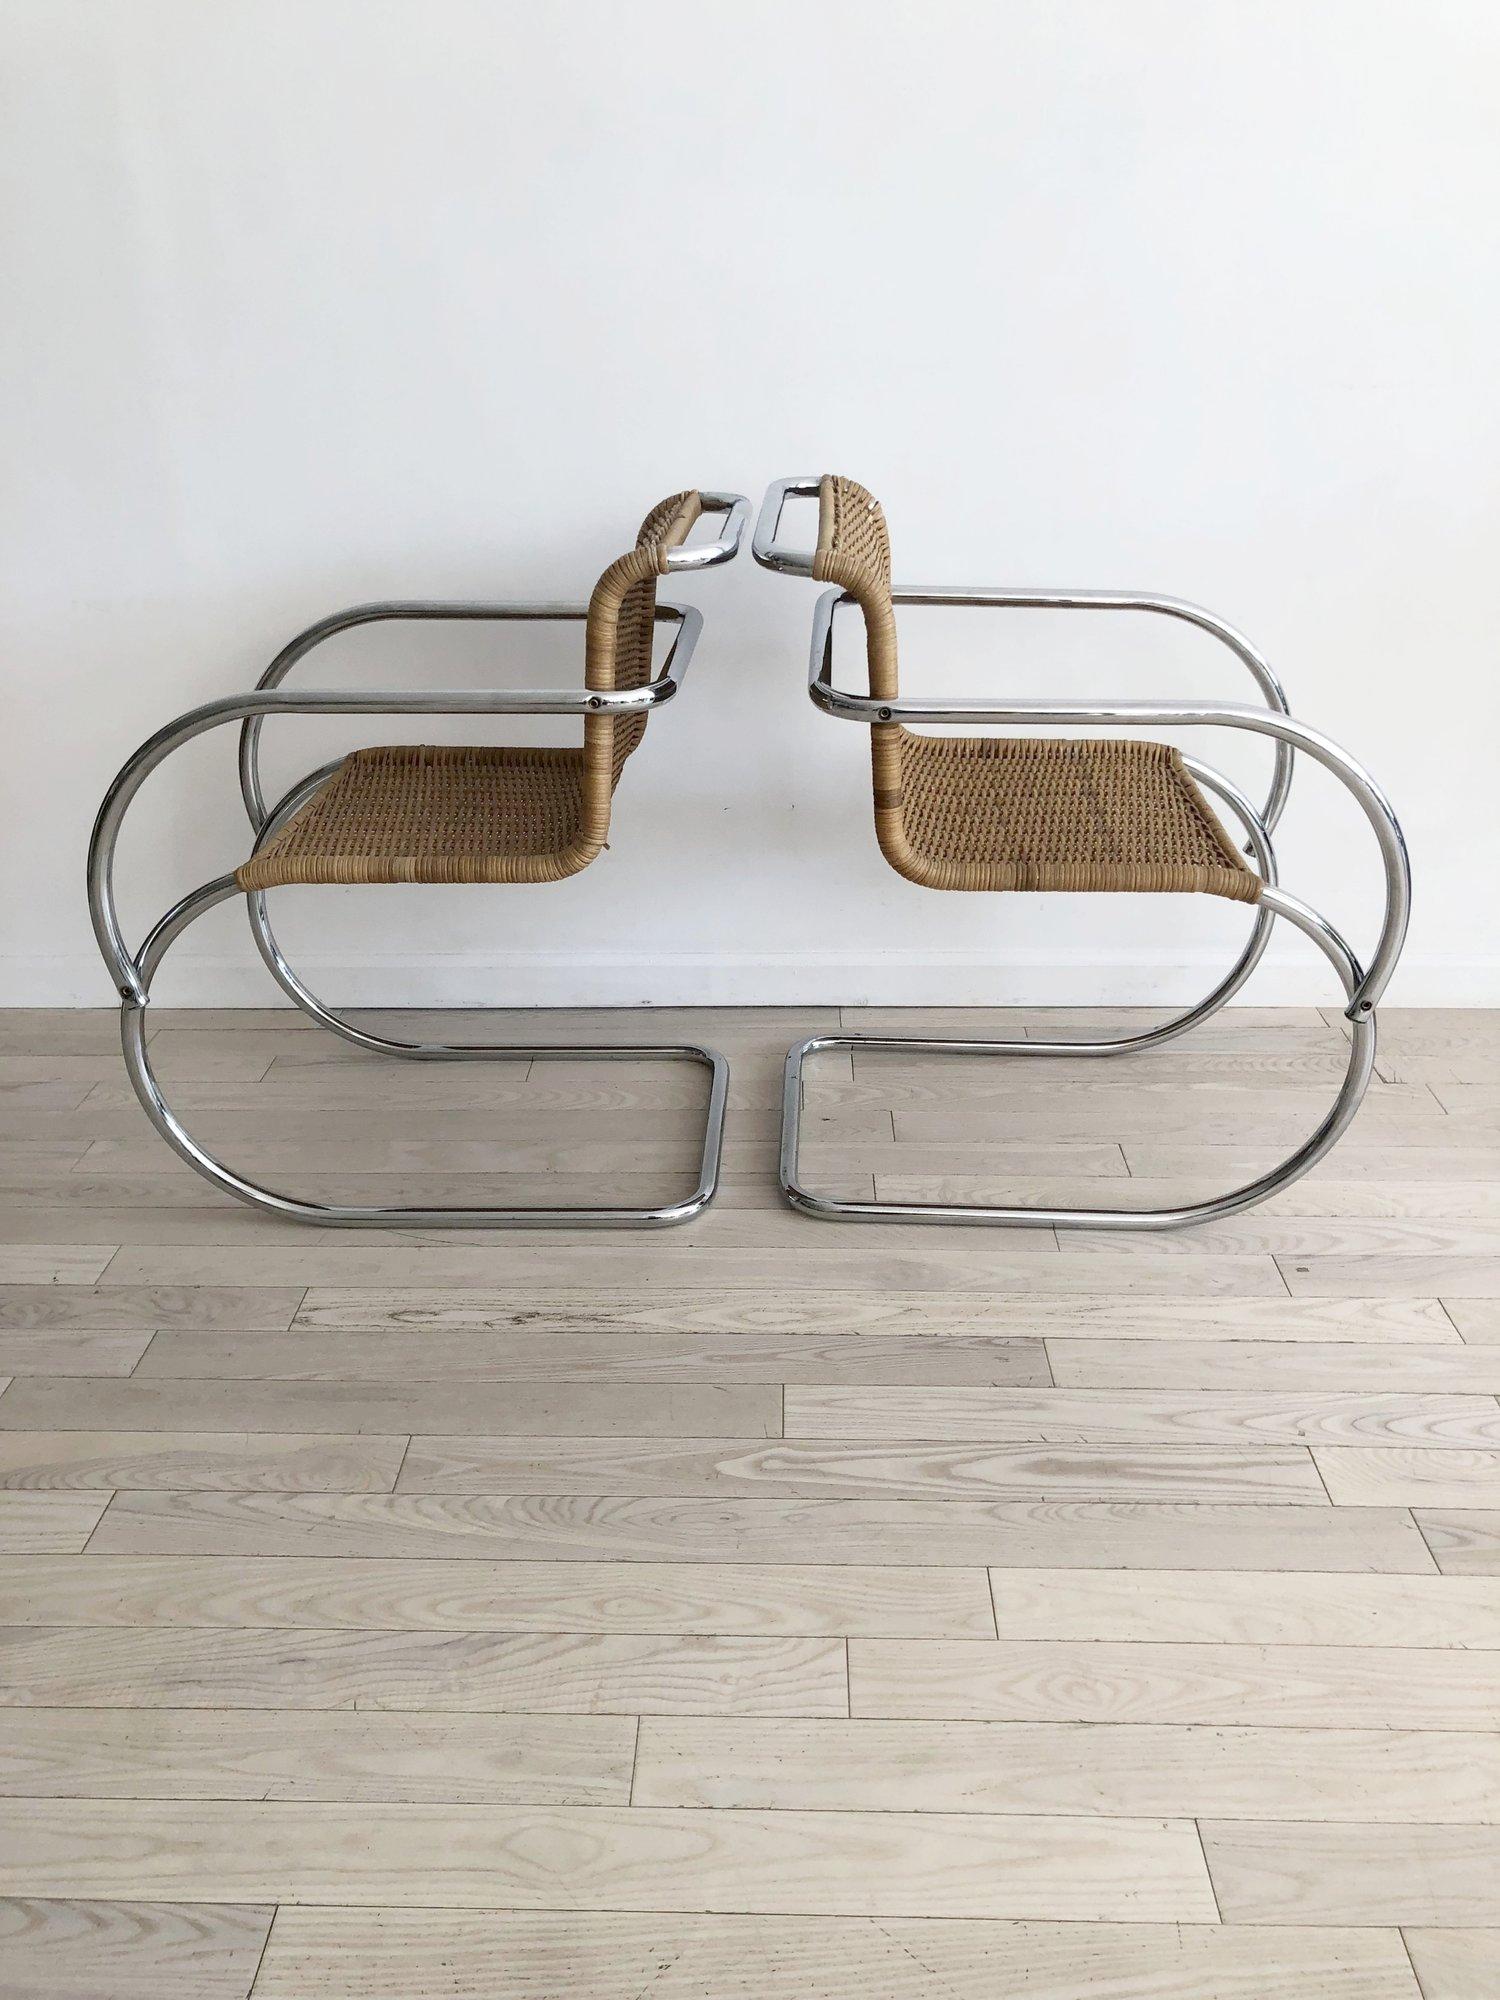 1970s Wicker MR Cantilever armchairs. Pair of vintage 1970s wicker MR chrome cantilever chairs after Mies van der Rohe. Excellent vintage condition. Some minor break in wicker, pictured. Functional and comfortable. Chrome is shinny.